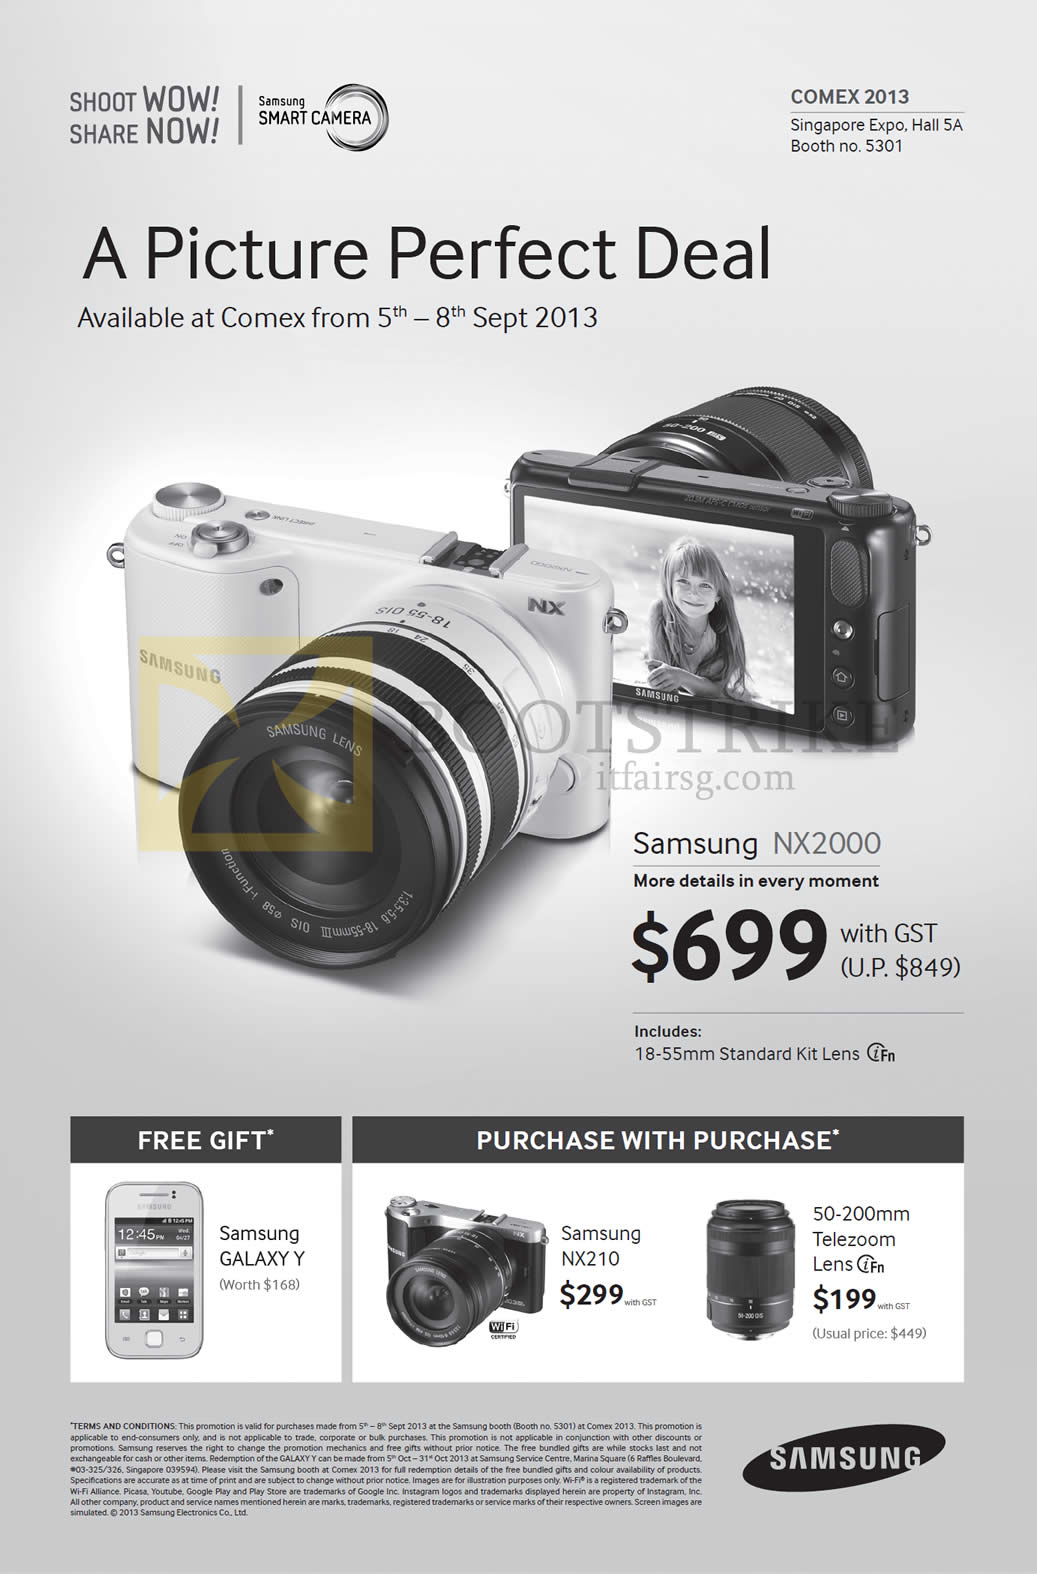 COMEX 2013 price list image brochure of Samsung Digital Cameras NX2000, Purchase With Purchase